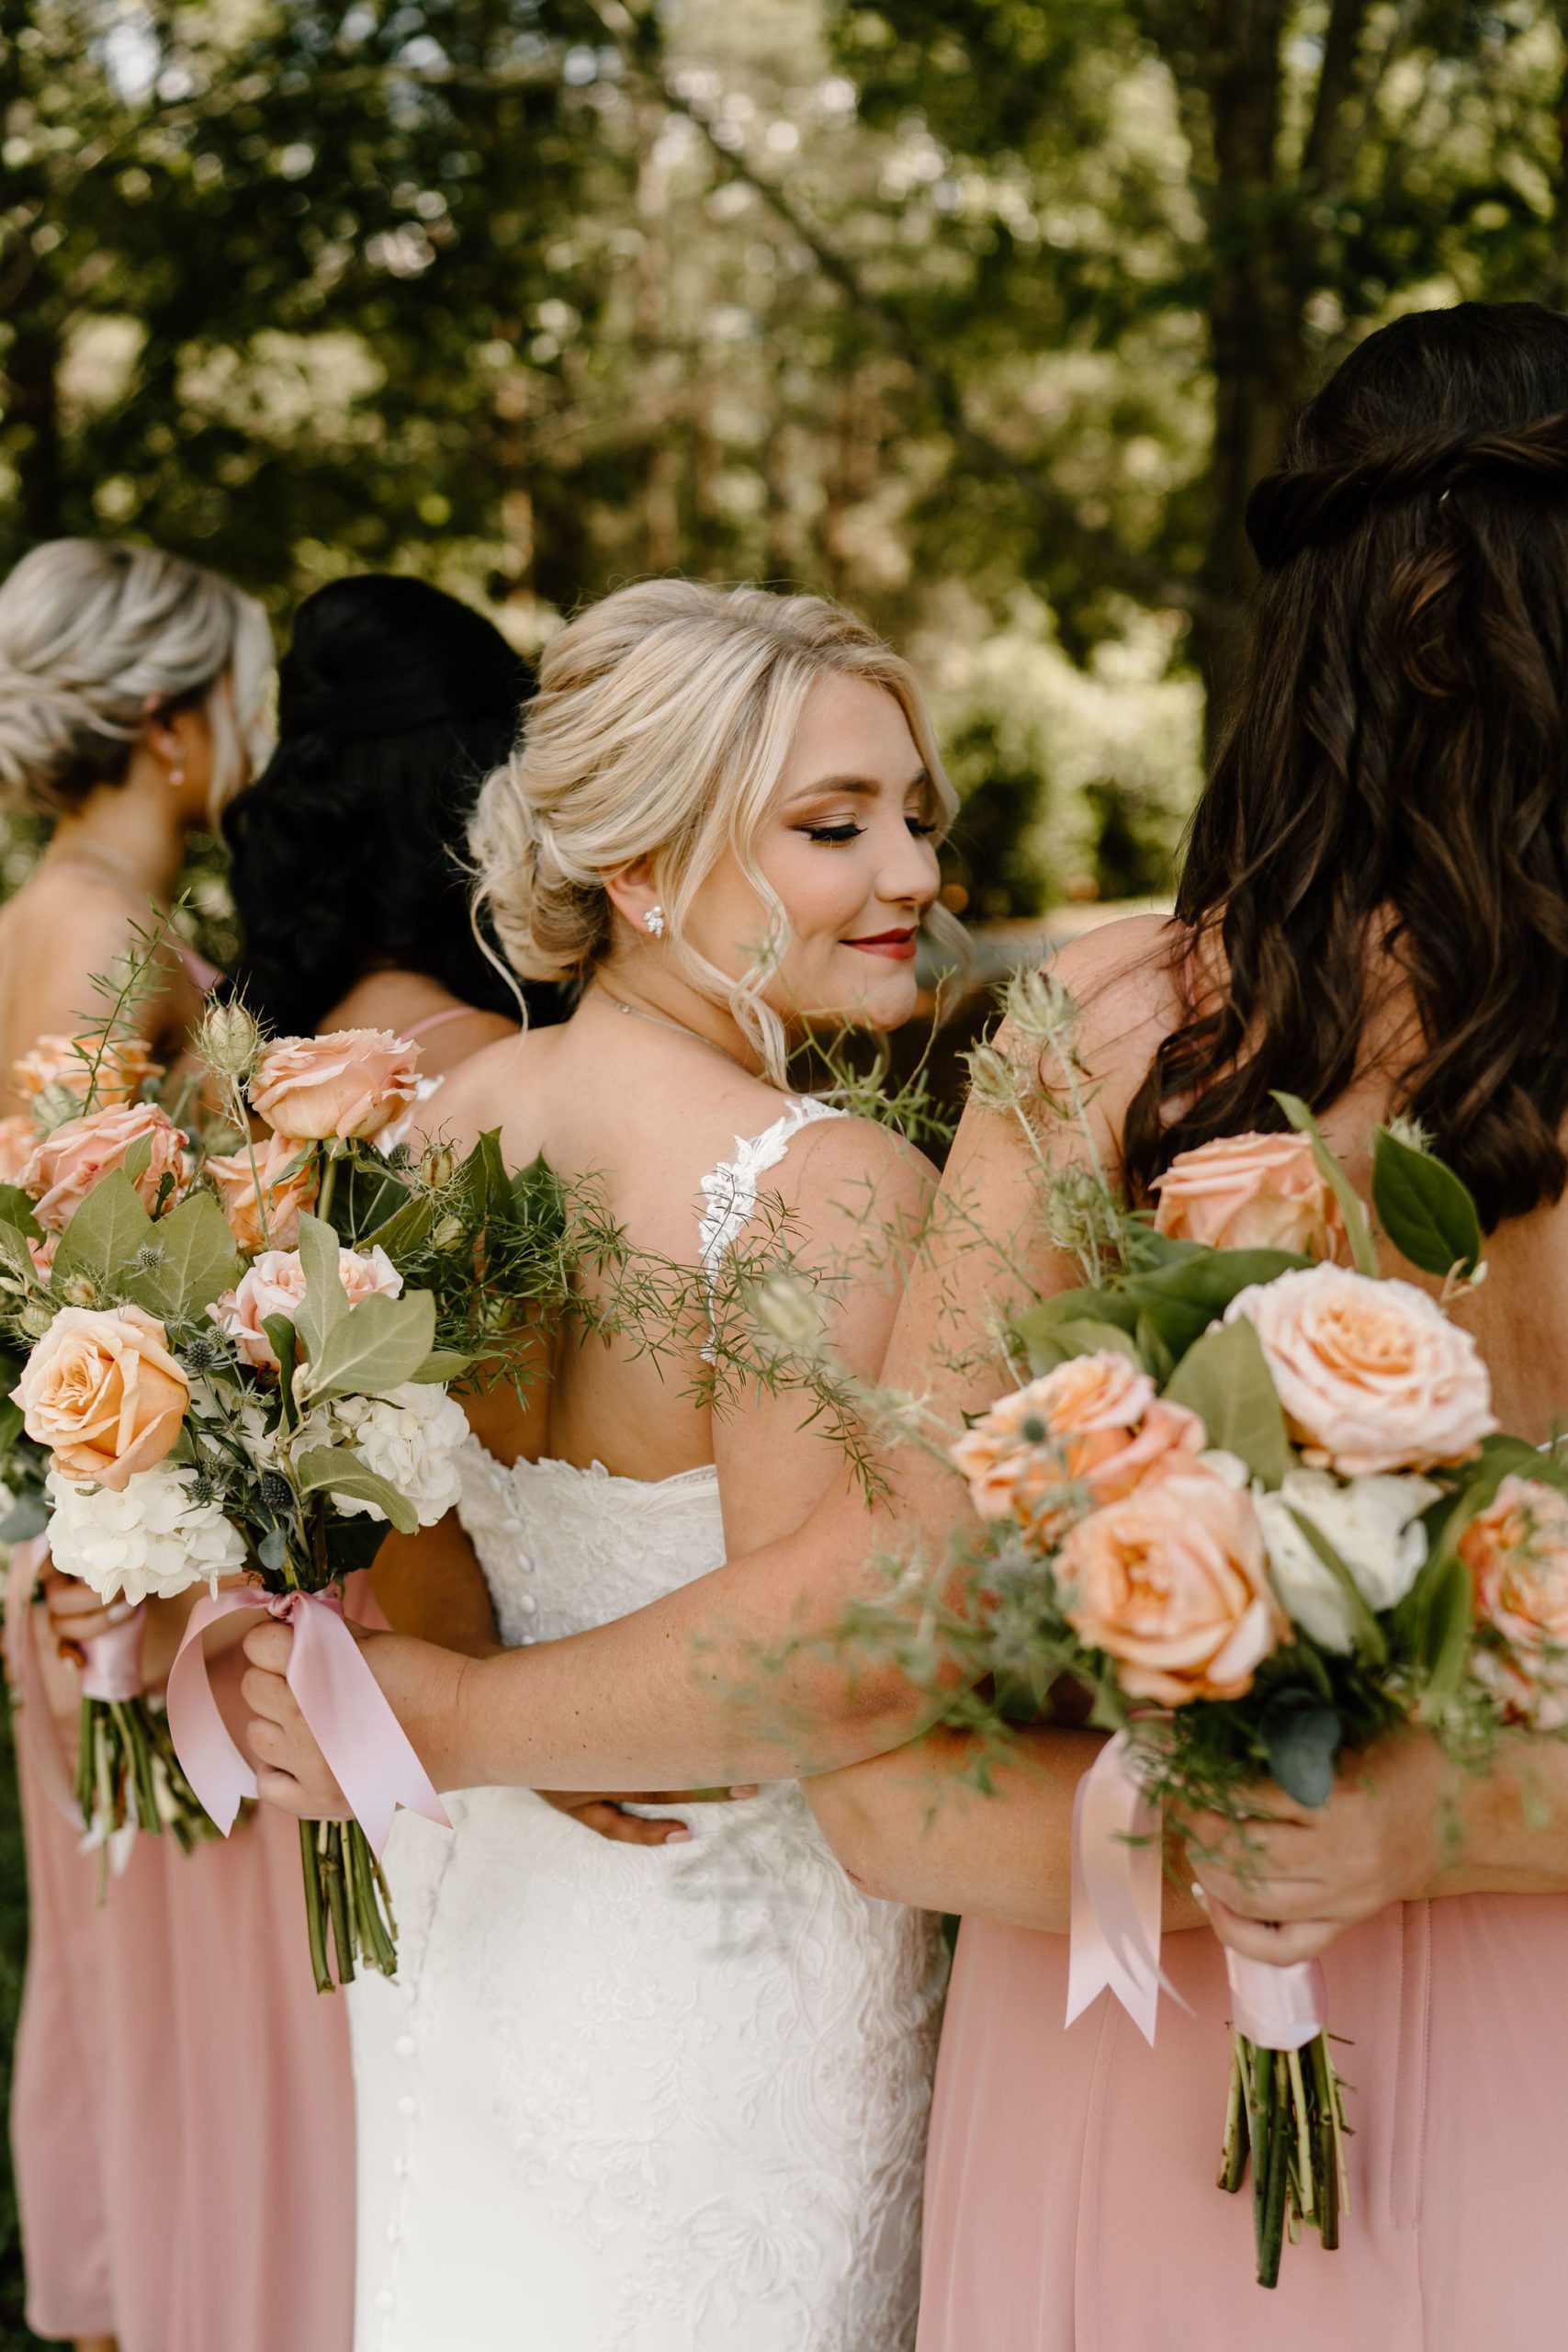 Long Acres Barn venue in Winston-Salem, North Carolina with beautiful decor and forest vibes in bridal party photos